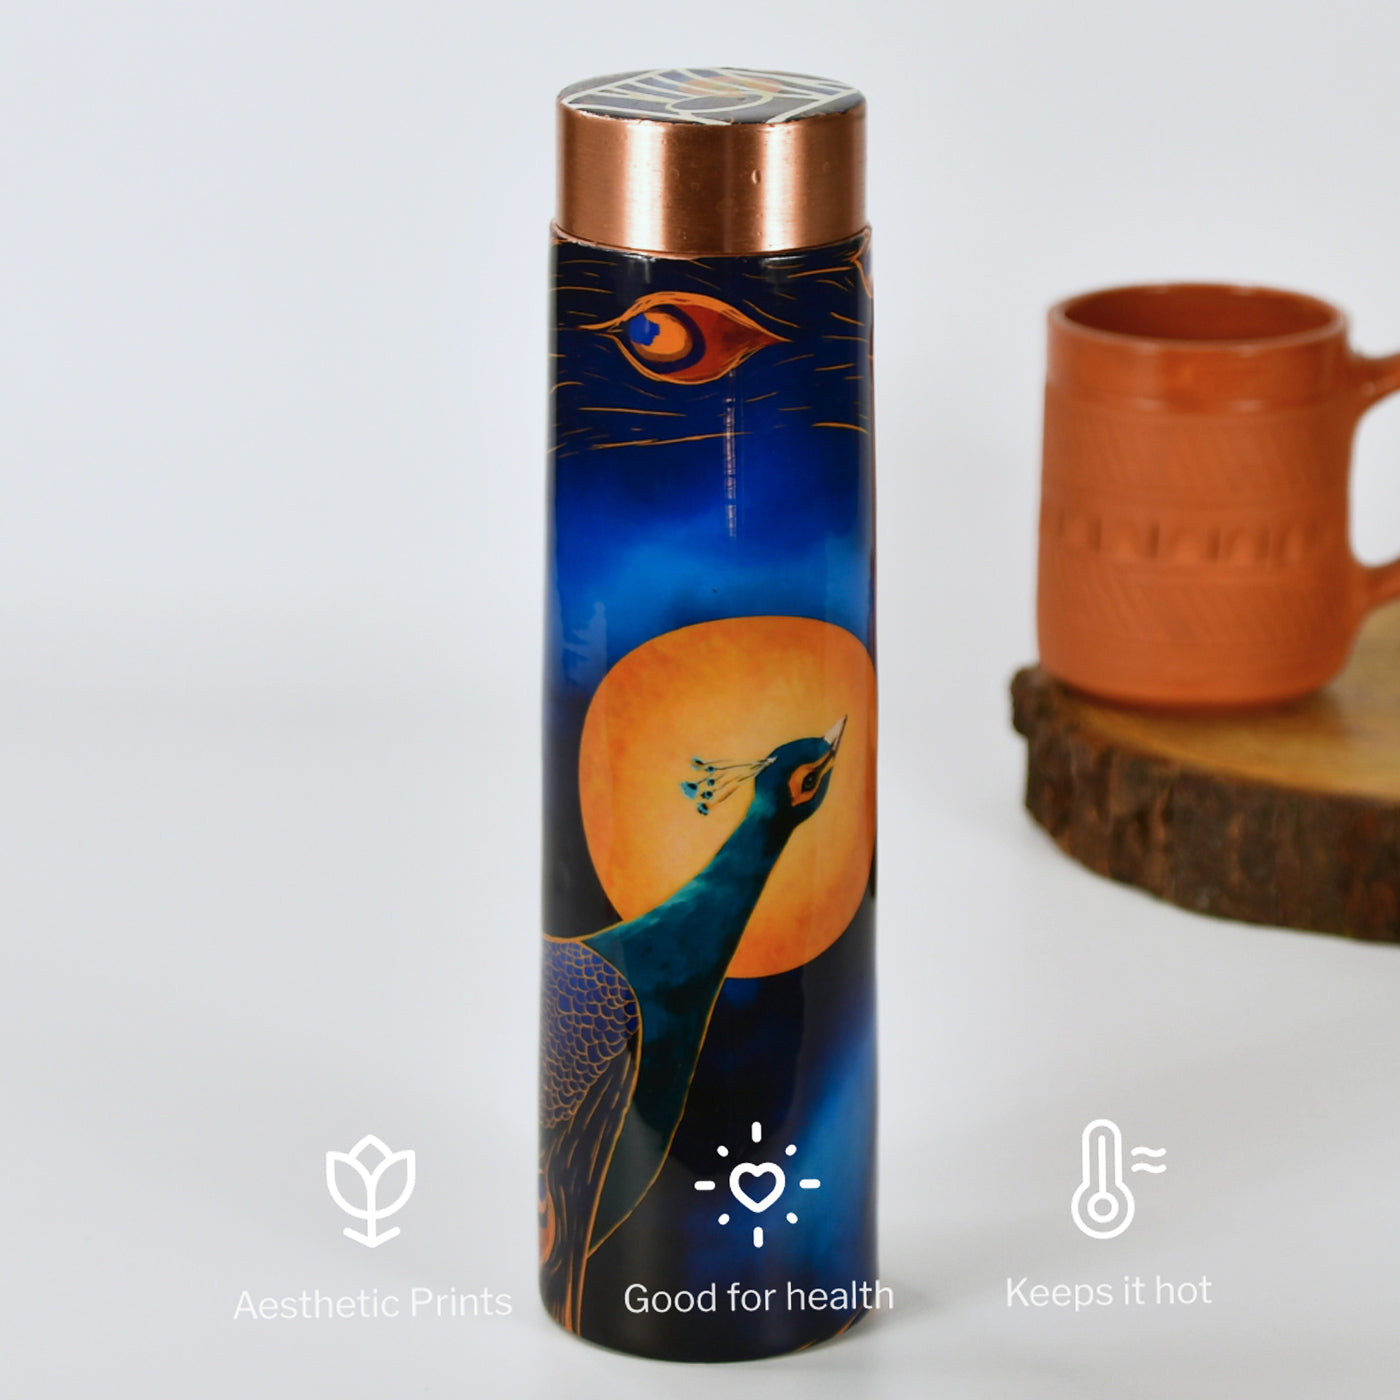 Copper Bottle Peacock Stylish Kitchenware Art for Home Decor and Storage